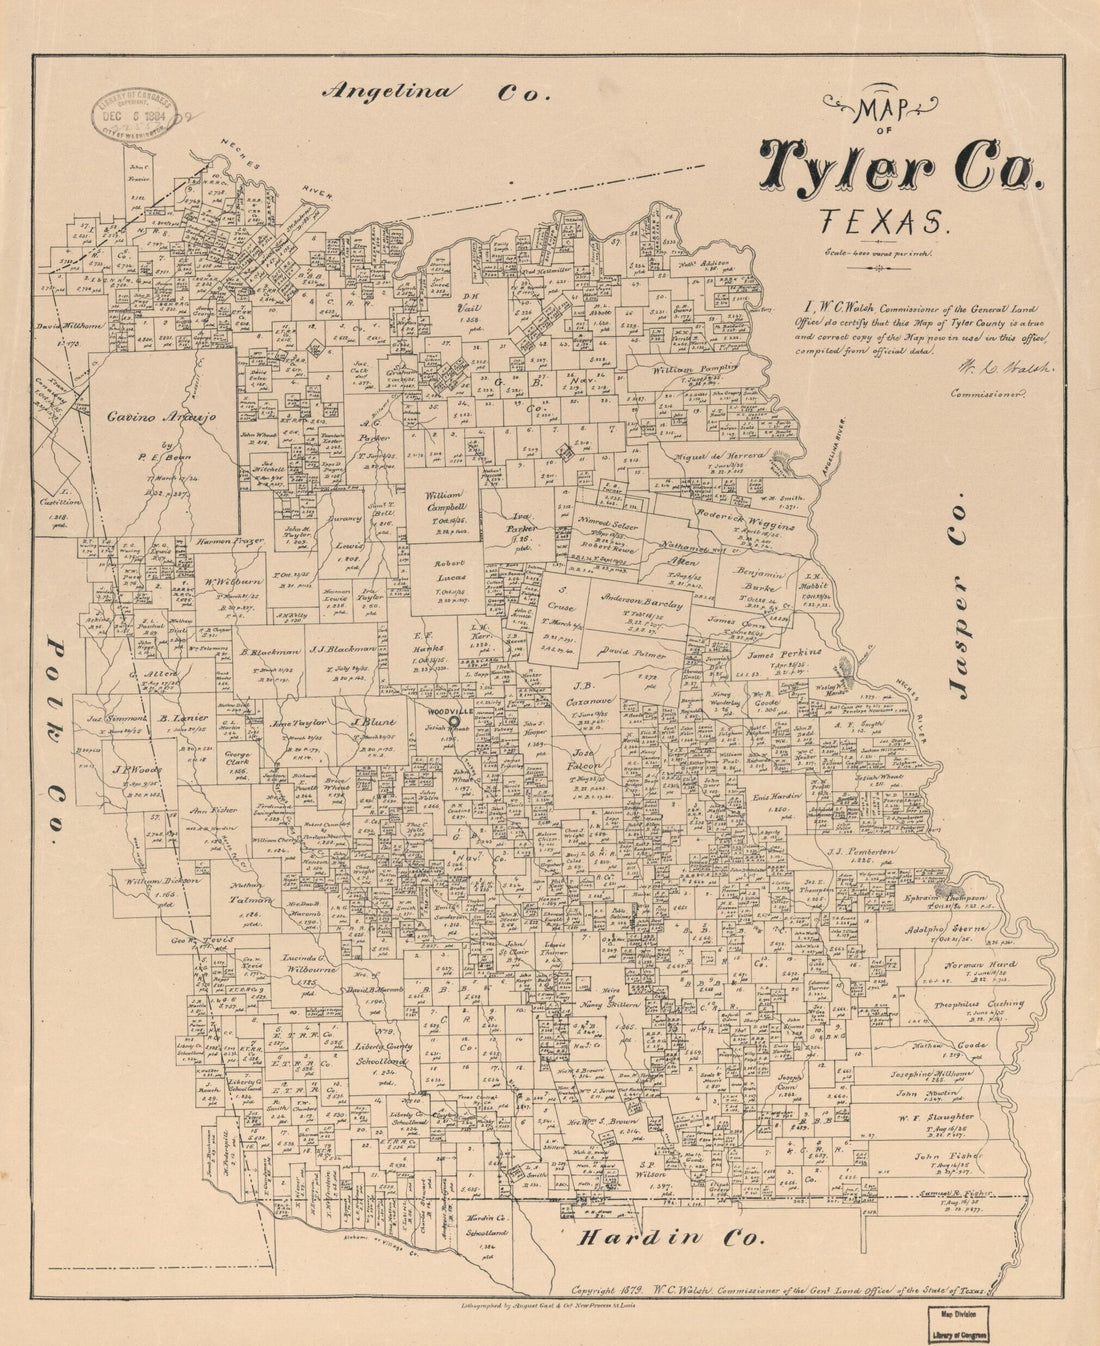 This old map of Map of Tyler Co., Texas. (Map of Tyler County, Texas) from 1879 was created by  August Gast &amp; Co,  Texas. General Land Office, W. C. (William C.) Walsh in 1879